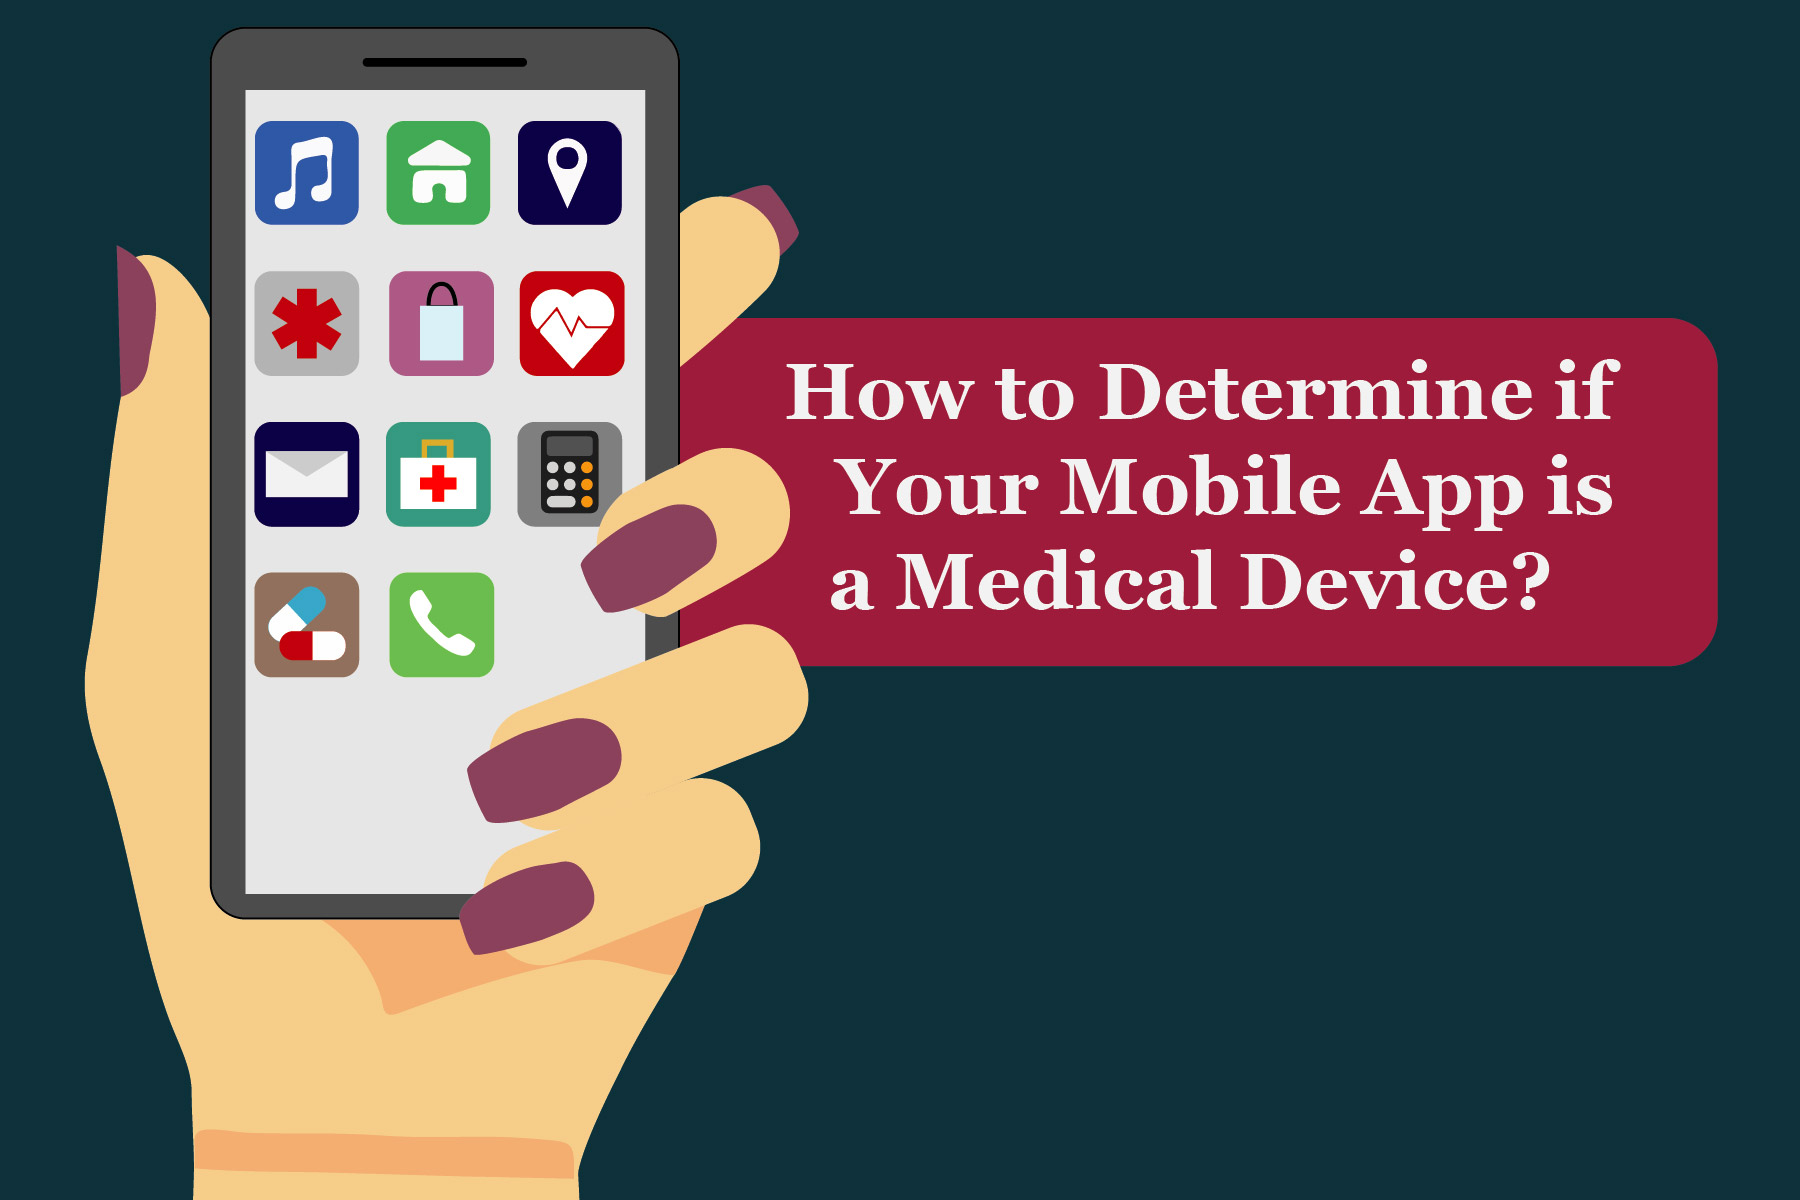 Mobile device being held with medical device apps on it